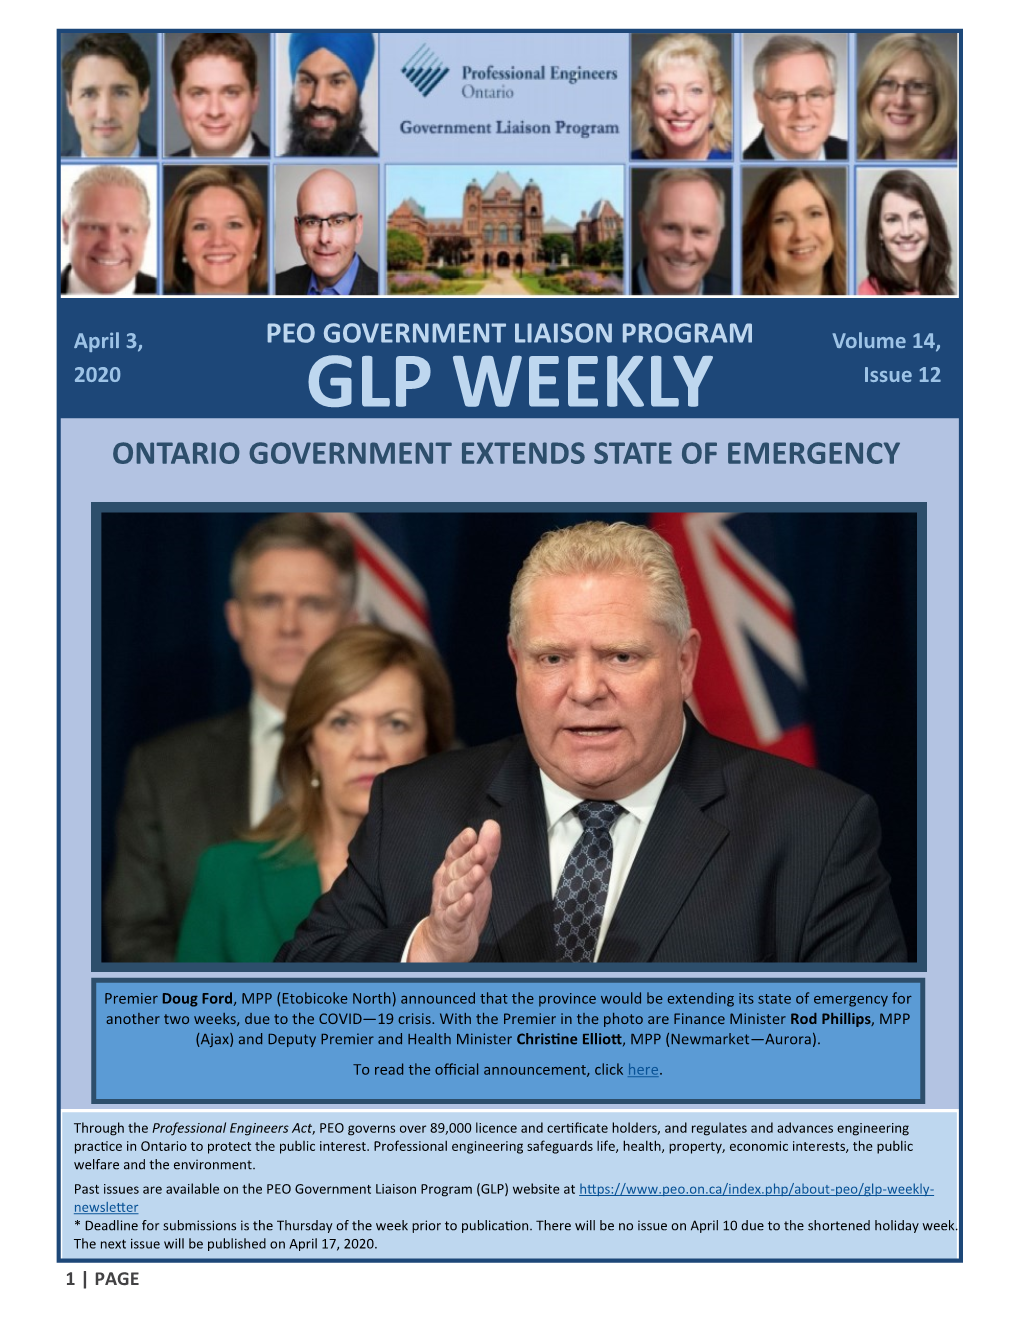 GLP WEEKLY Issue 12